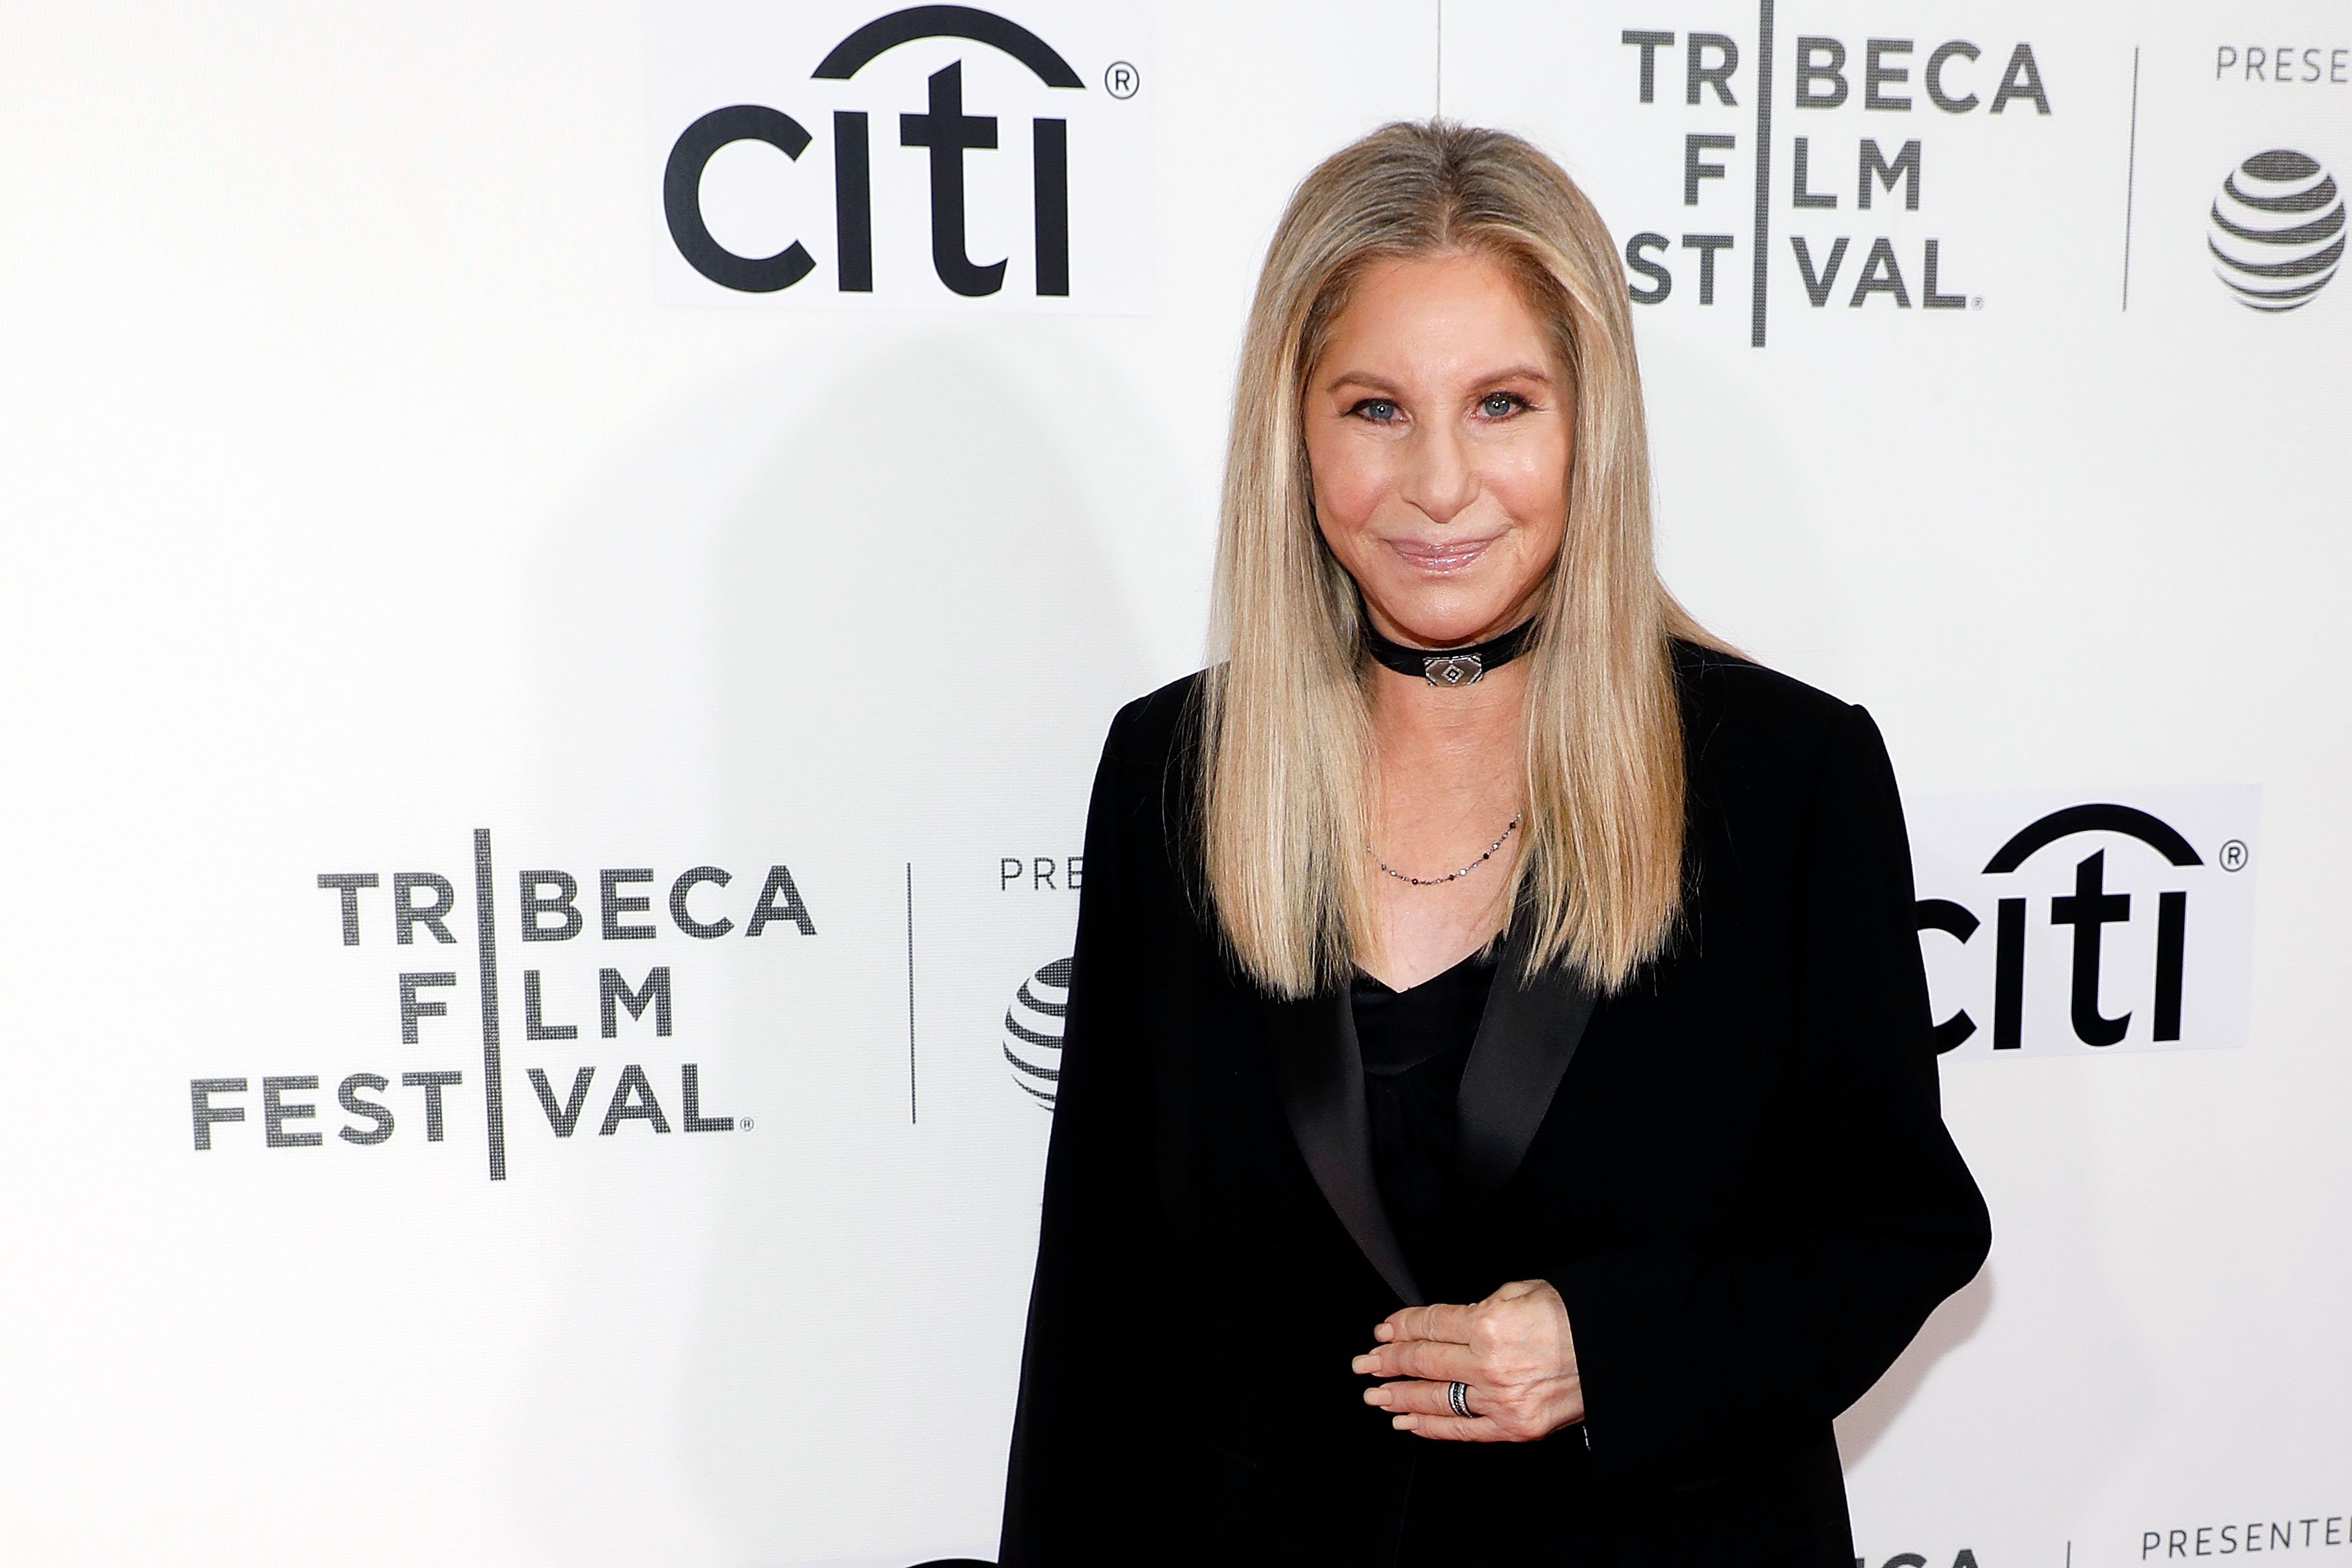 Barbra Streisand at the 2017 Tribeca Film Festival at Borough of Manhattan Community College on April 29, 2017  | Photo: GettyImages